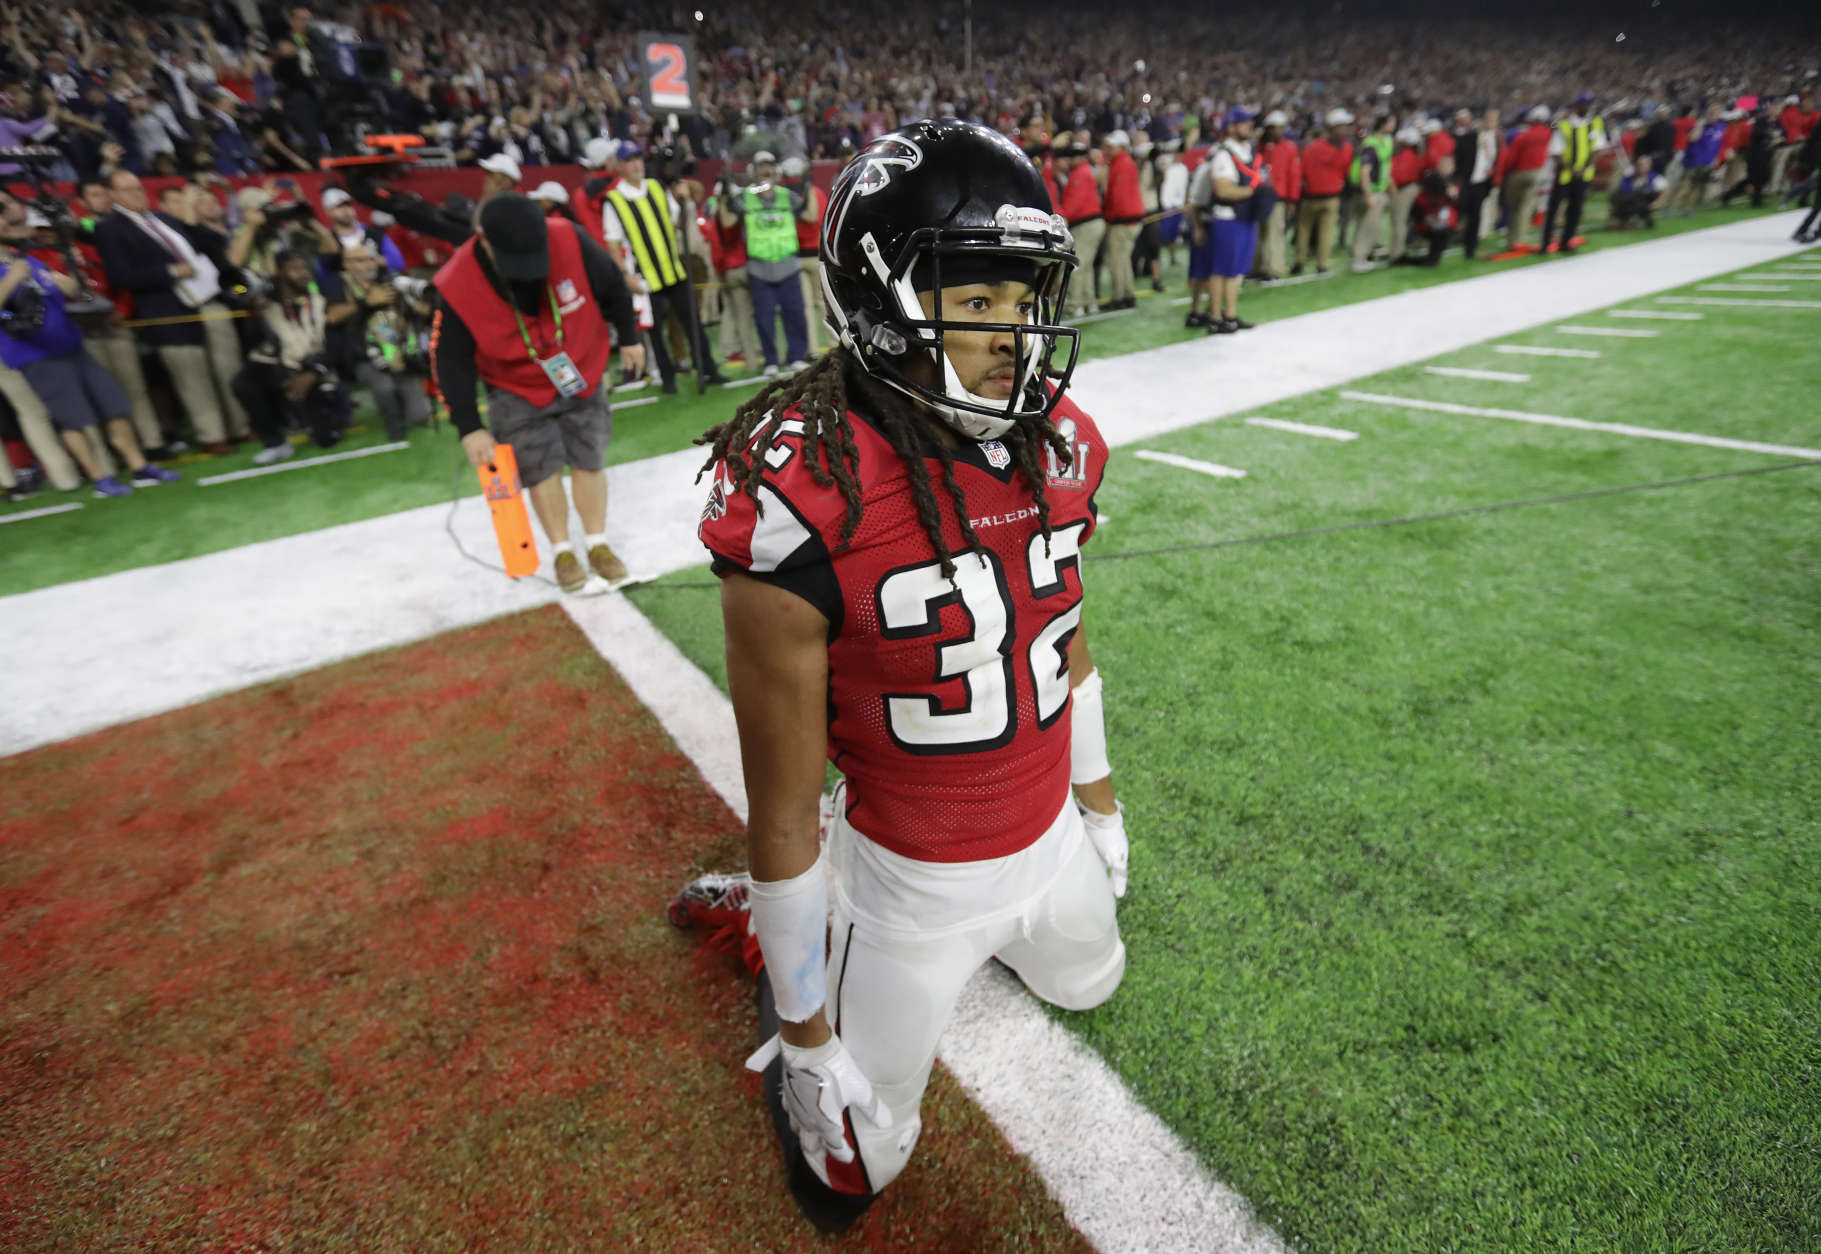 HOUSTON, TX - FEBRUARY 05: Jalen Collins #32 of the Atlanta Falcons reacts after the New England Patriots defeat the Falcons 32-28 in overtime of Super Bowl 51 at NRG Stadium on February 5, 2017 in Houston, Texas.  (Photo by Ronald Martinez/Getty Images)